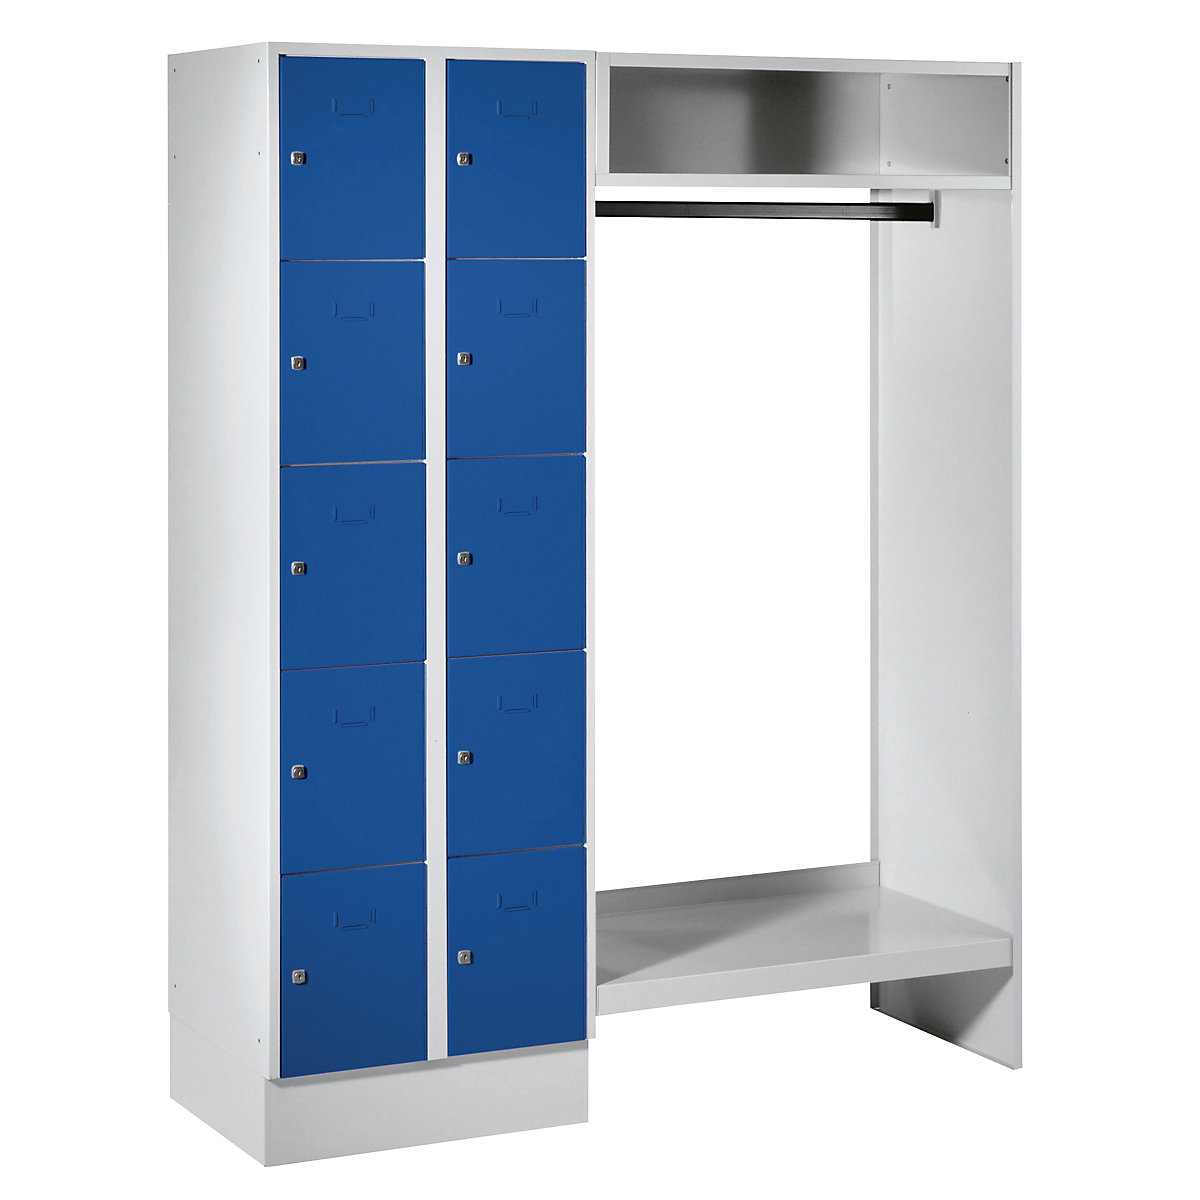 Cloakroom locker system – Wolf, 10 compartments on left, 10 coat hangers, overall width 1470 mm, compartment width 298 mm, gentian blue-16